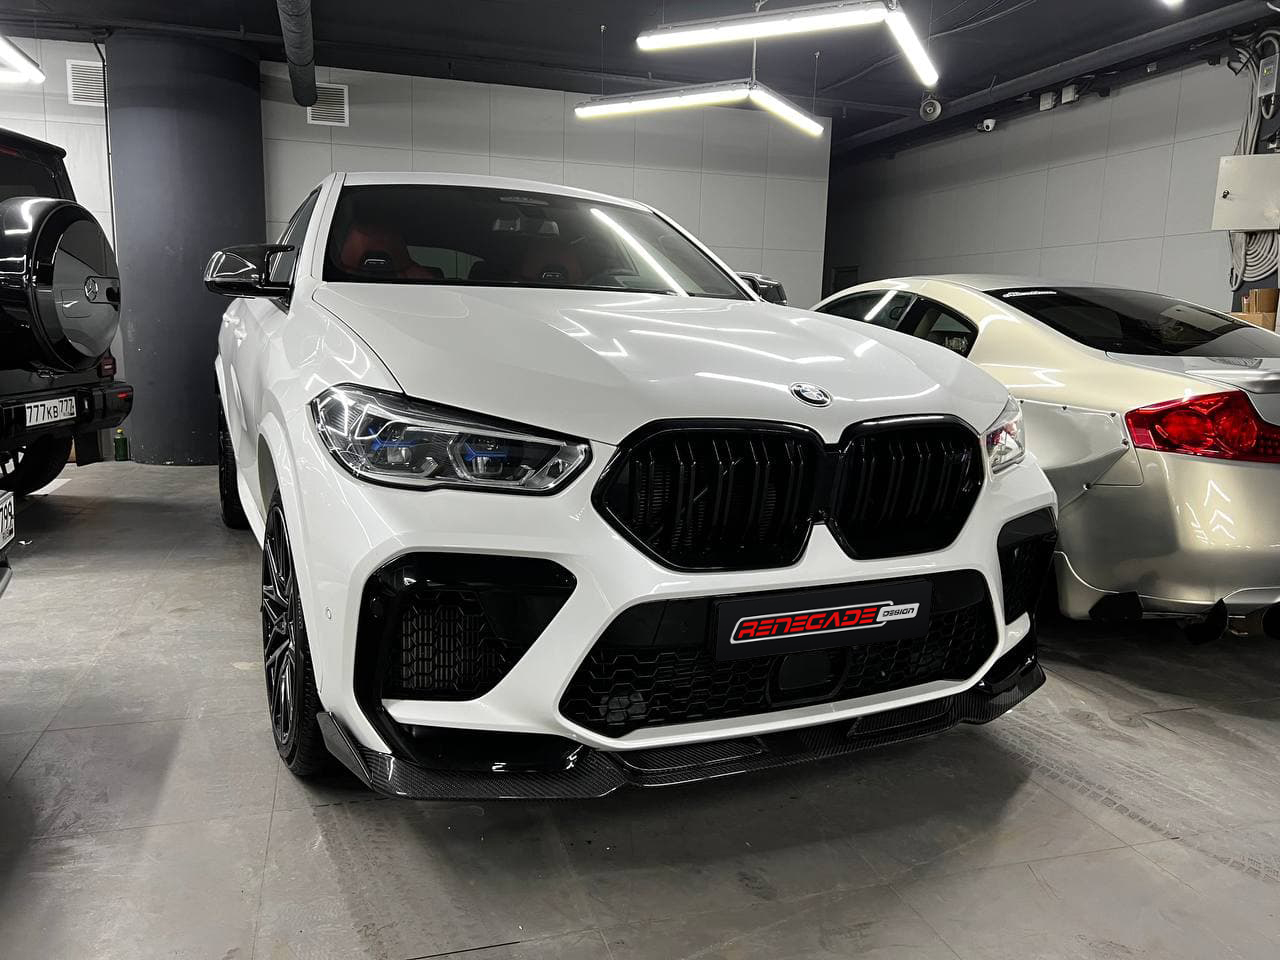 Renegade Design body kit for BMW X6 M F96 Buy with delivery, installation,  affordable price and guarantee